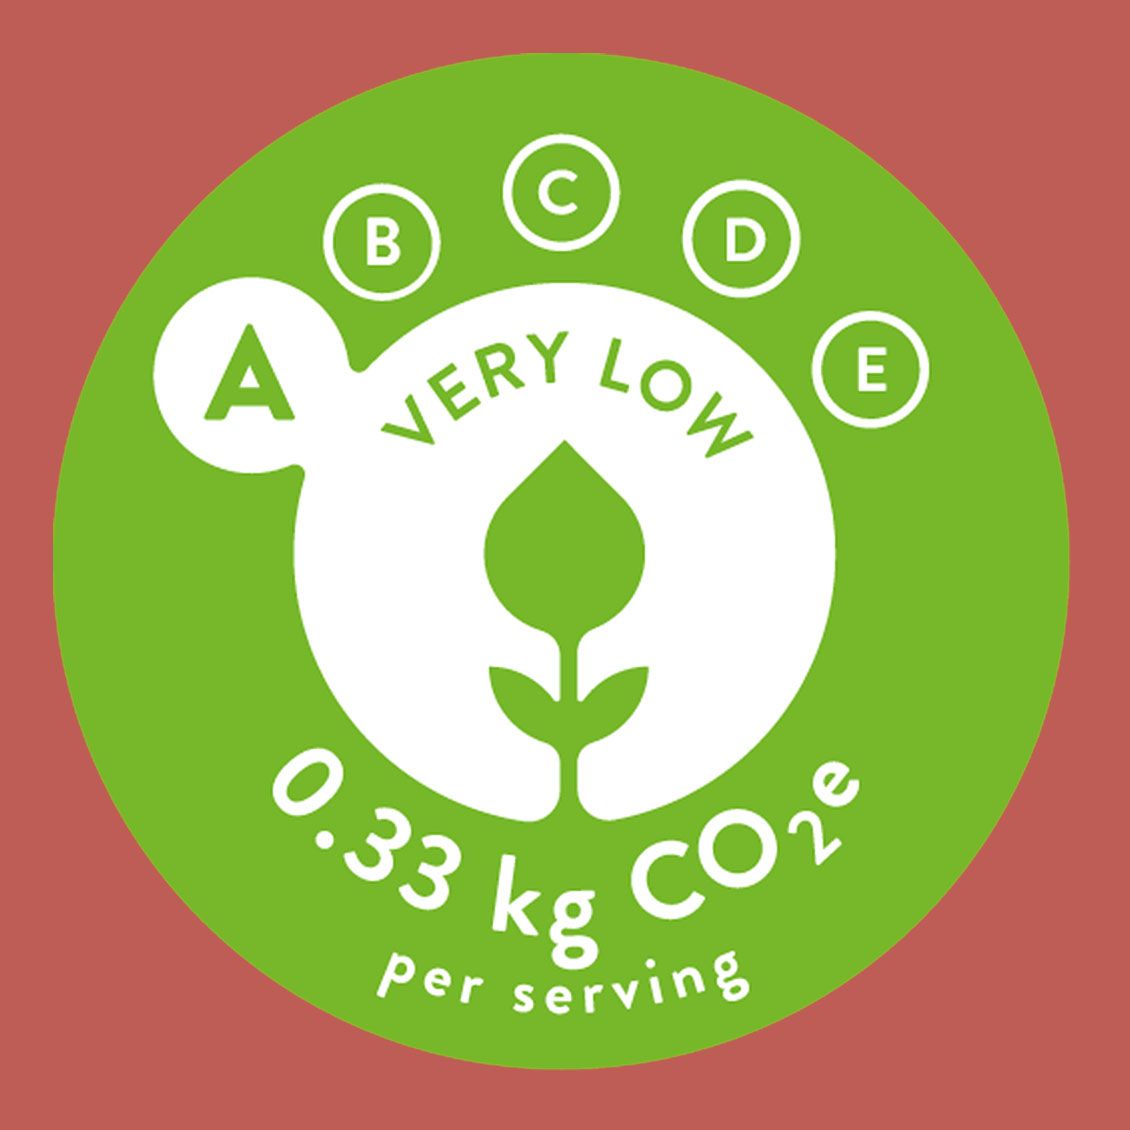 Carbon Labelling – VERY LOW (1130×1130) 